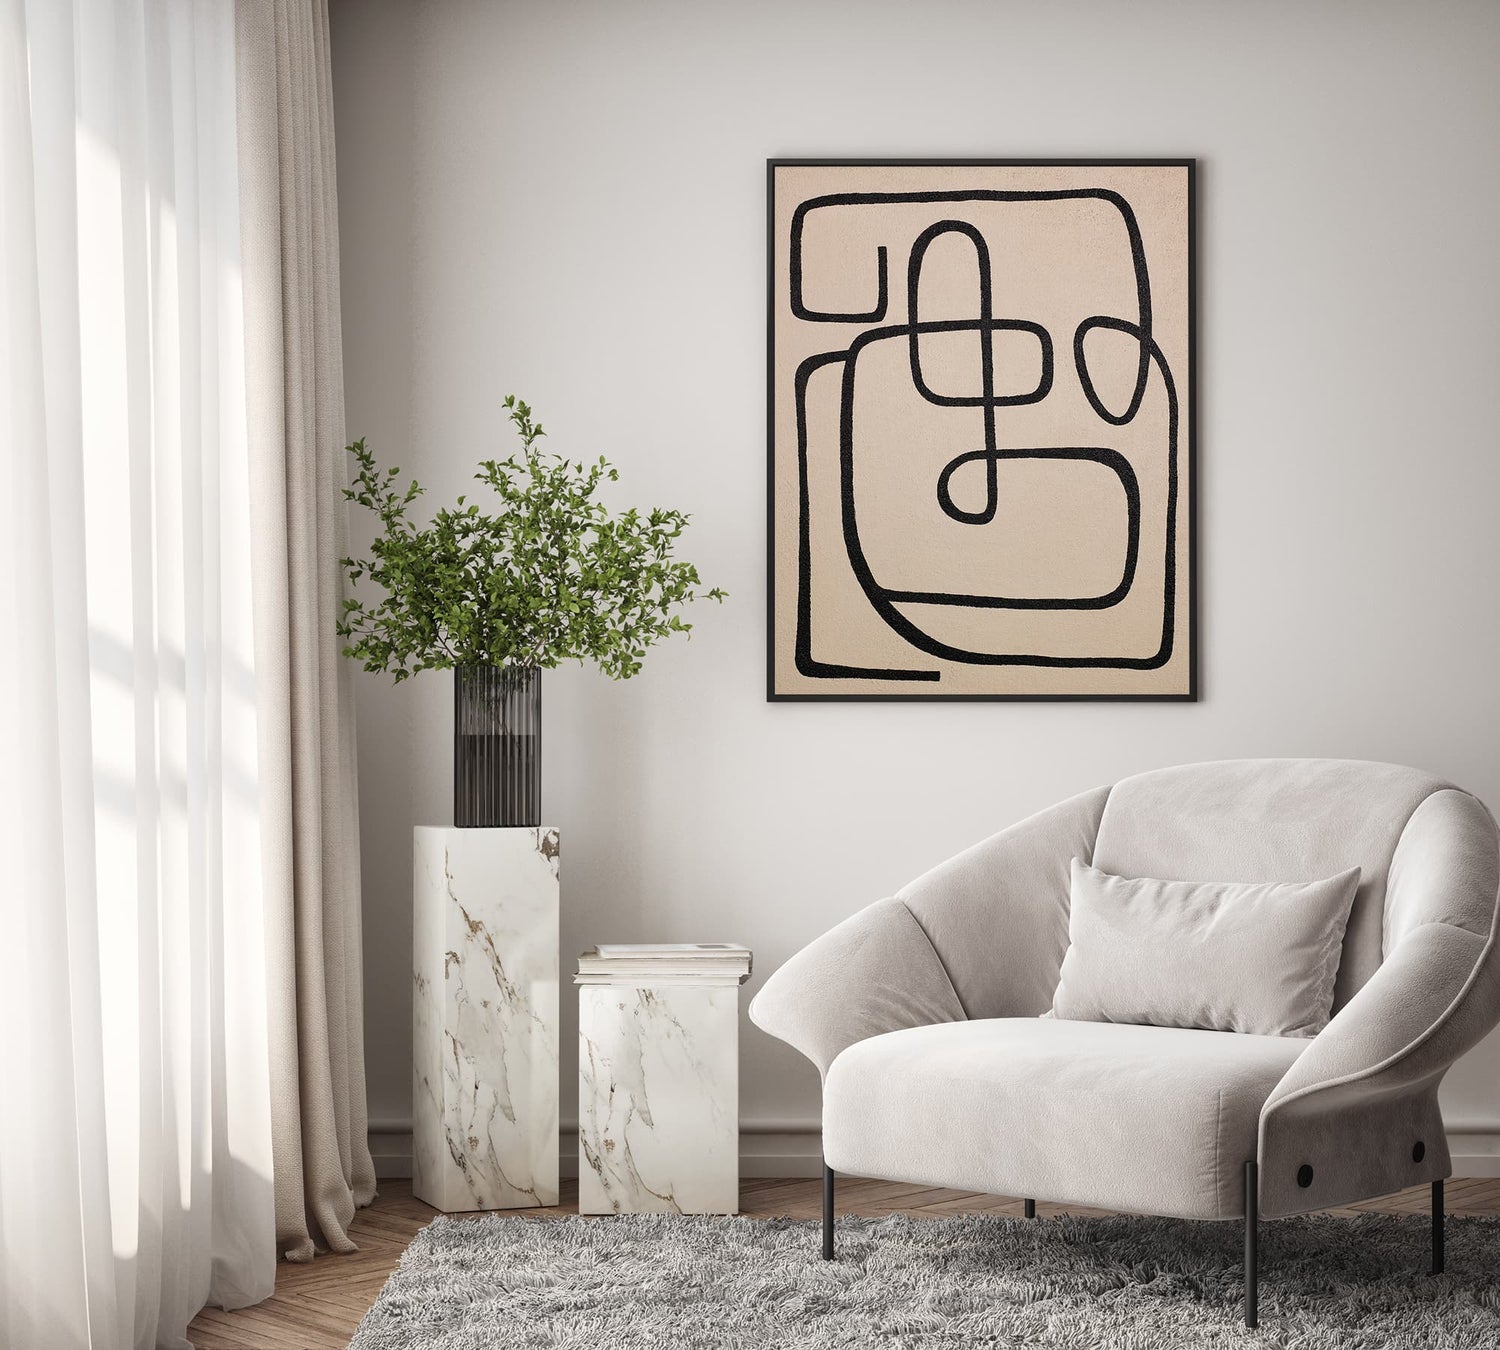 "Exquisite hand-painted, high-quality and premium Portrait shaped textured wall art painting hanging on the lounge room."